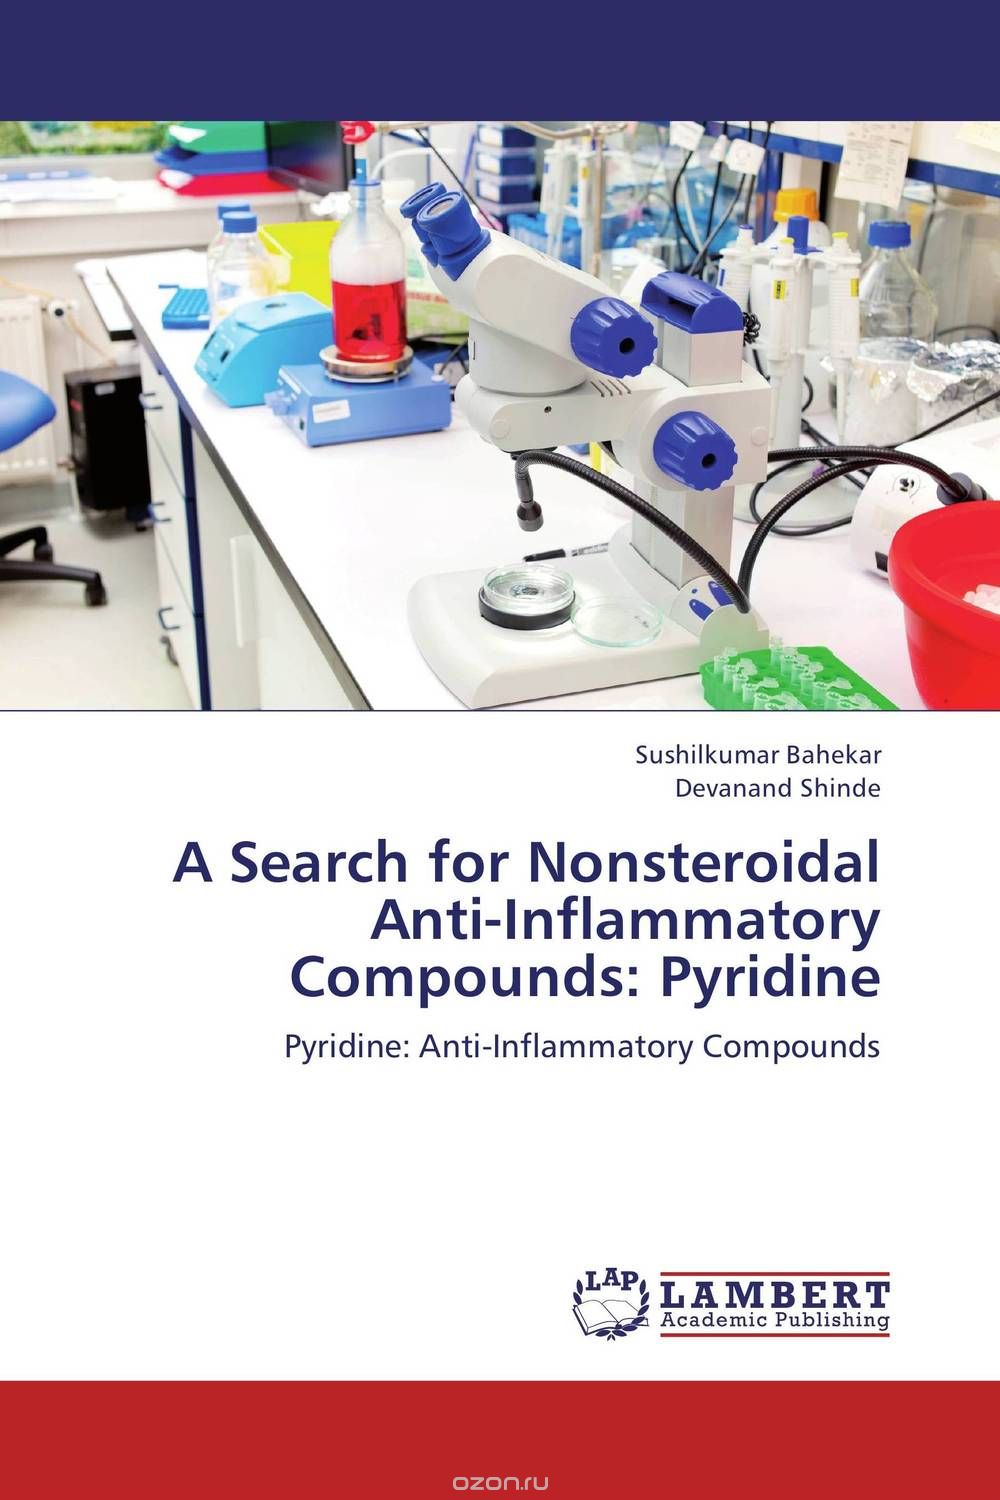 A Search for Nonsteroidal  Anti-Inflammatory Compounds: Pyridine